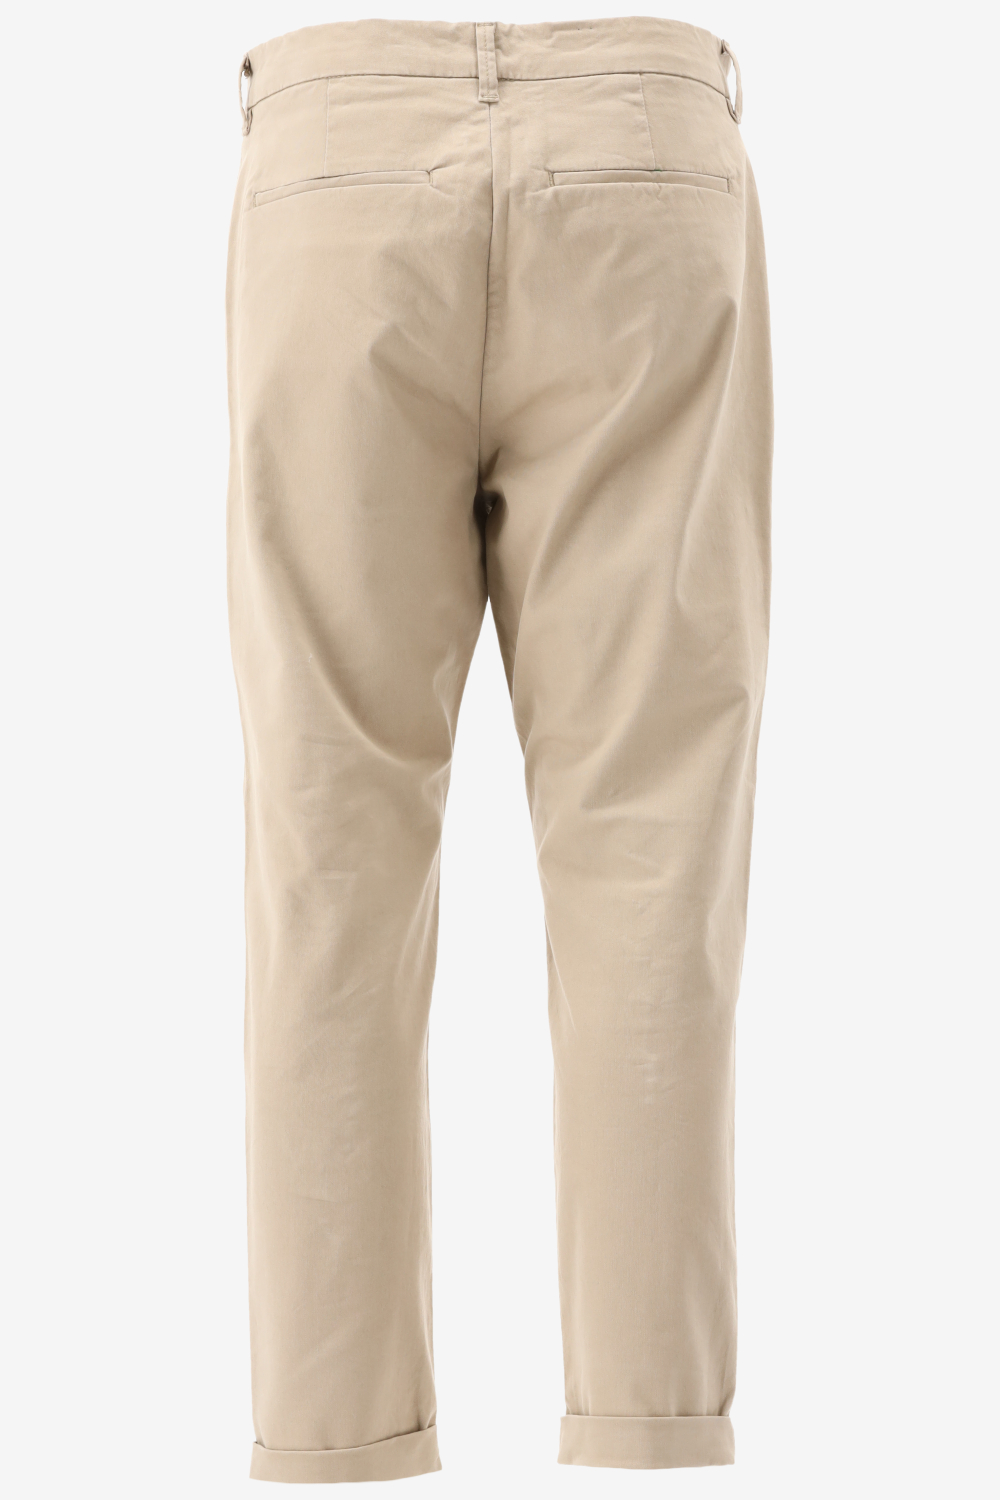 Only & Sons Chino KENT 